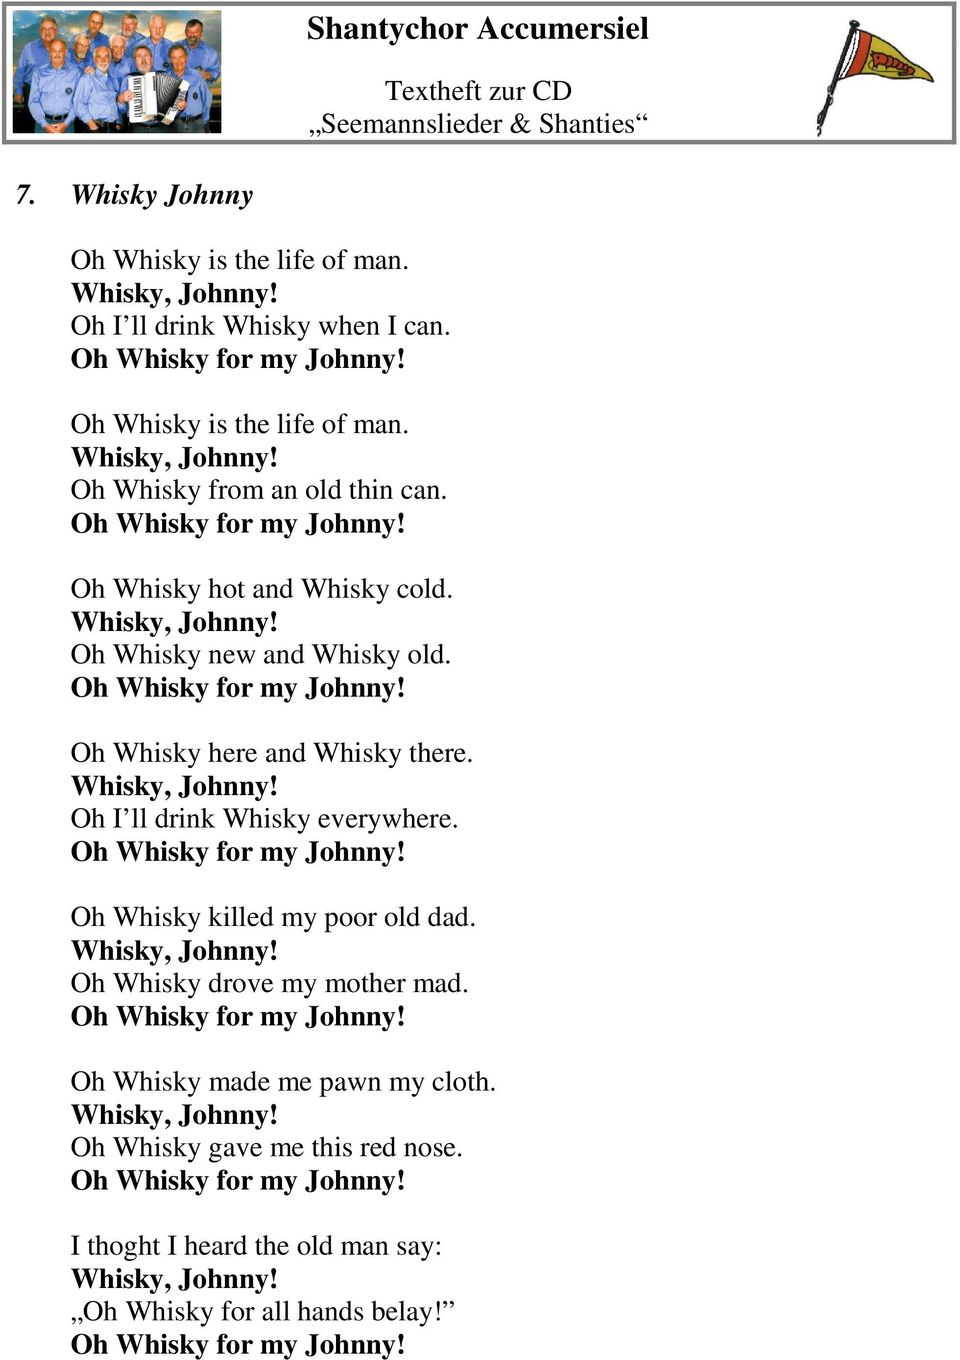 Oh Whisky for my Johnny! Oh Whisky killed my poor old dad. Whisky, Johnny! Oh Whisky drove my mother mad. Oh Whisky for my Johnny! Oh Whisky made me pawn my cloth. Whisky, Johnny! Oh Whisky gave me this red nose.